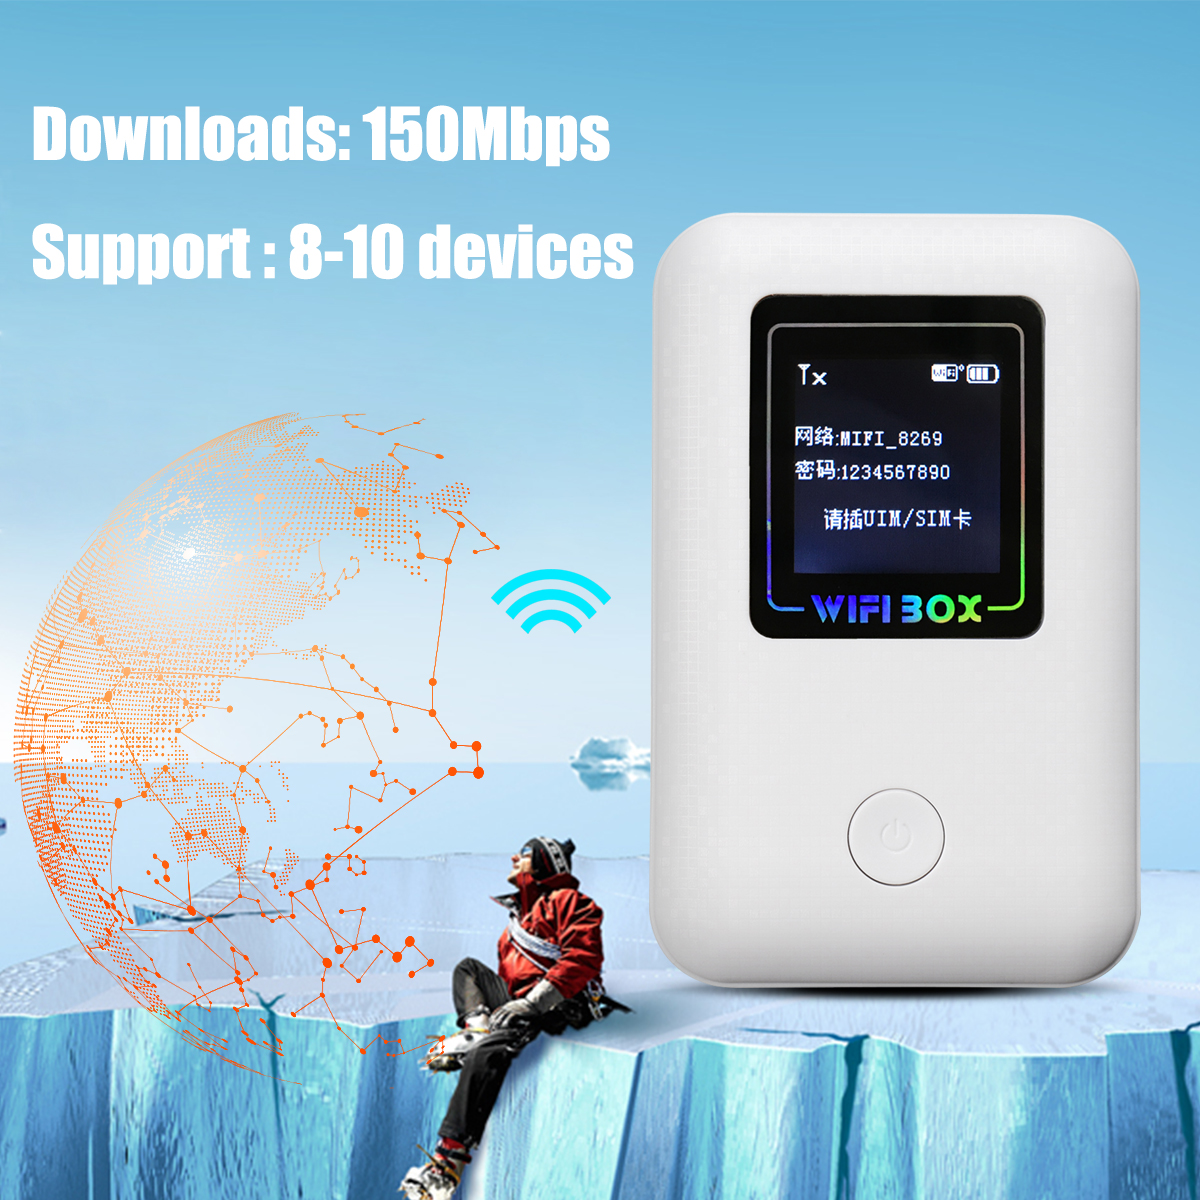 4G-Wireless-Mobile-Router-Portable-WIfi-Modem-150Mbps-Support-8-Devices-FDD-LTE-WIFI-Sharing-1406712